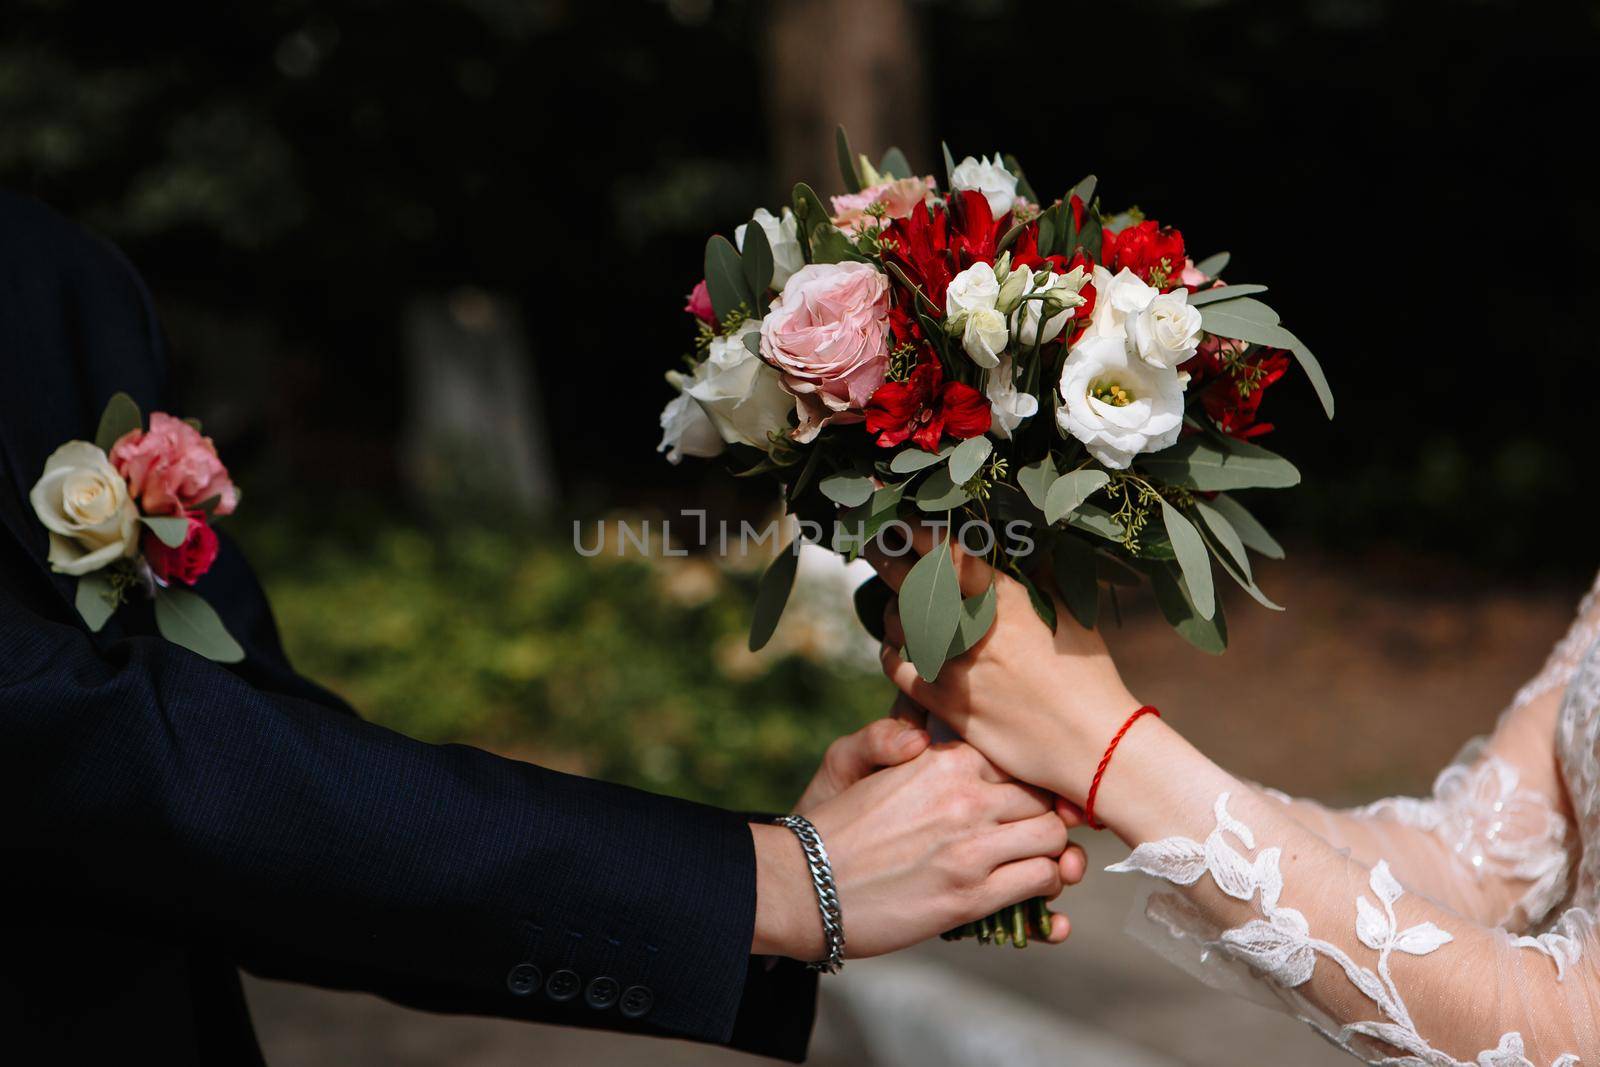 Beautiful wedding bouquet with colorful flowers. Transfer of the groom's bouquet to the bride.